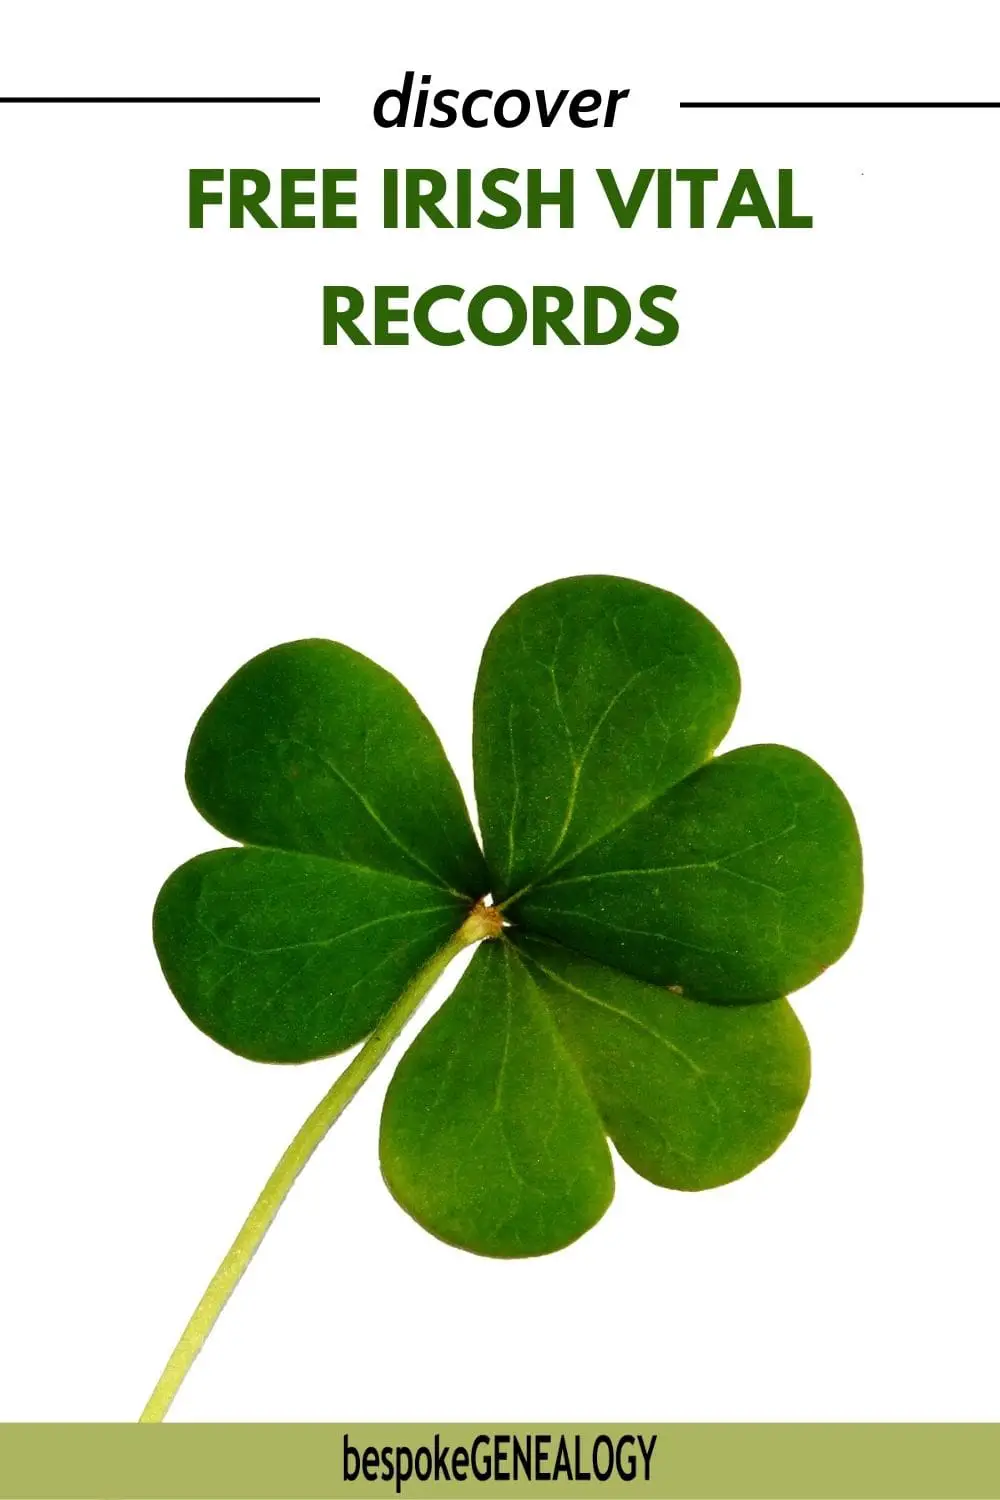 Discover free Irish vital records. Picture of a green three leaf clover.